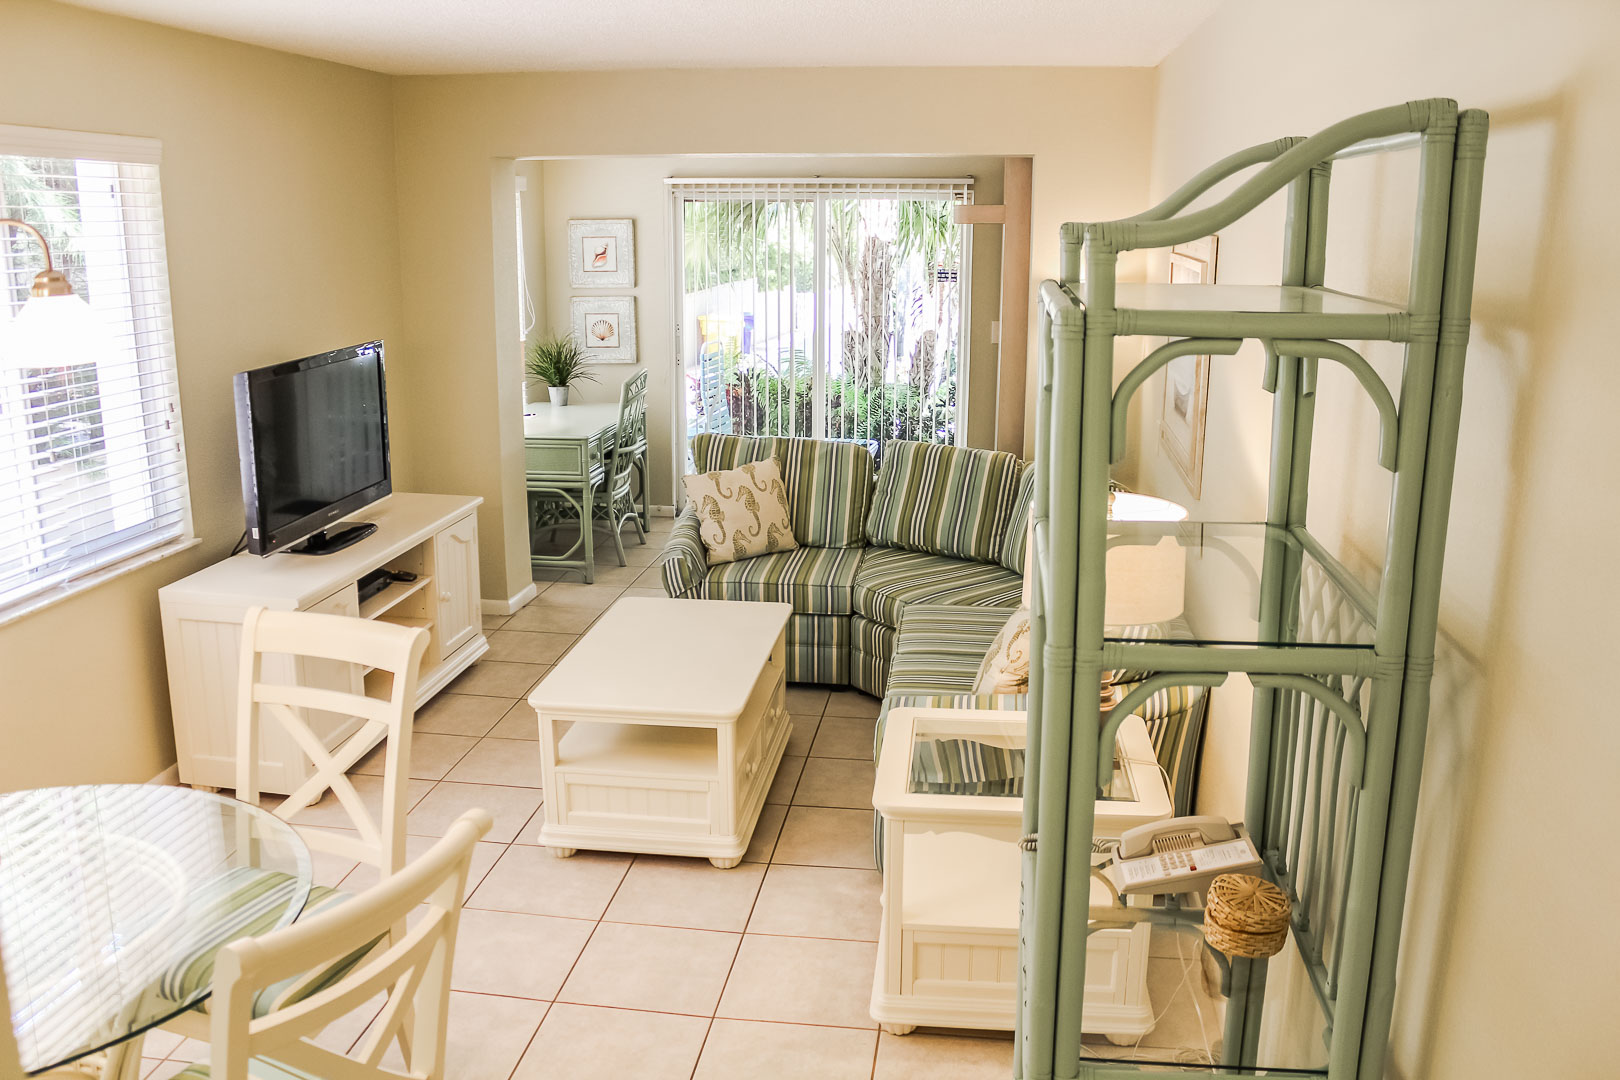 A refreshing living room at VRI's Berkshire by the Sea in Florida.